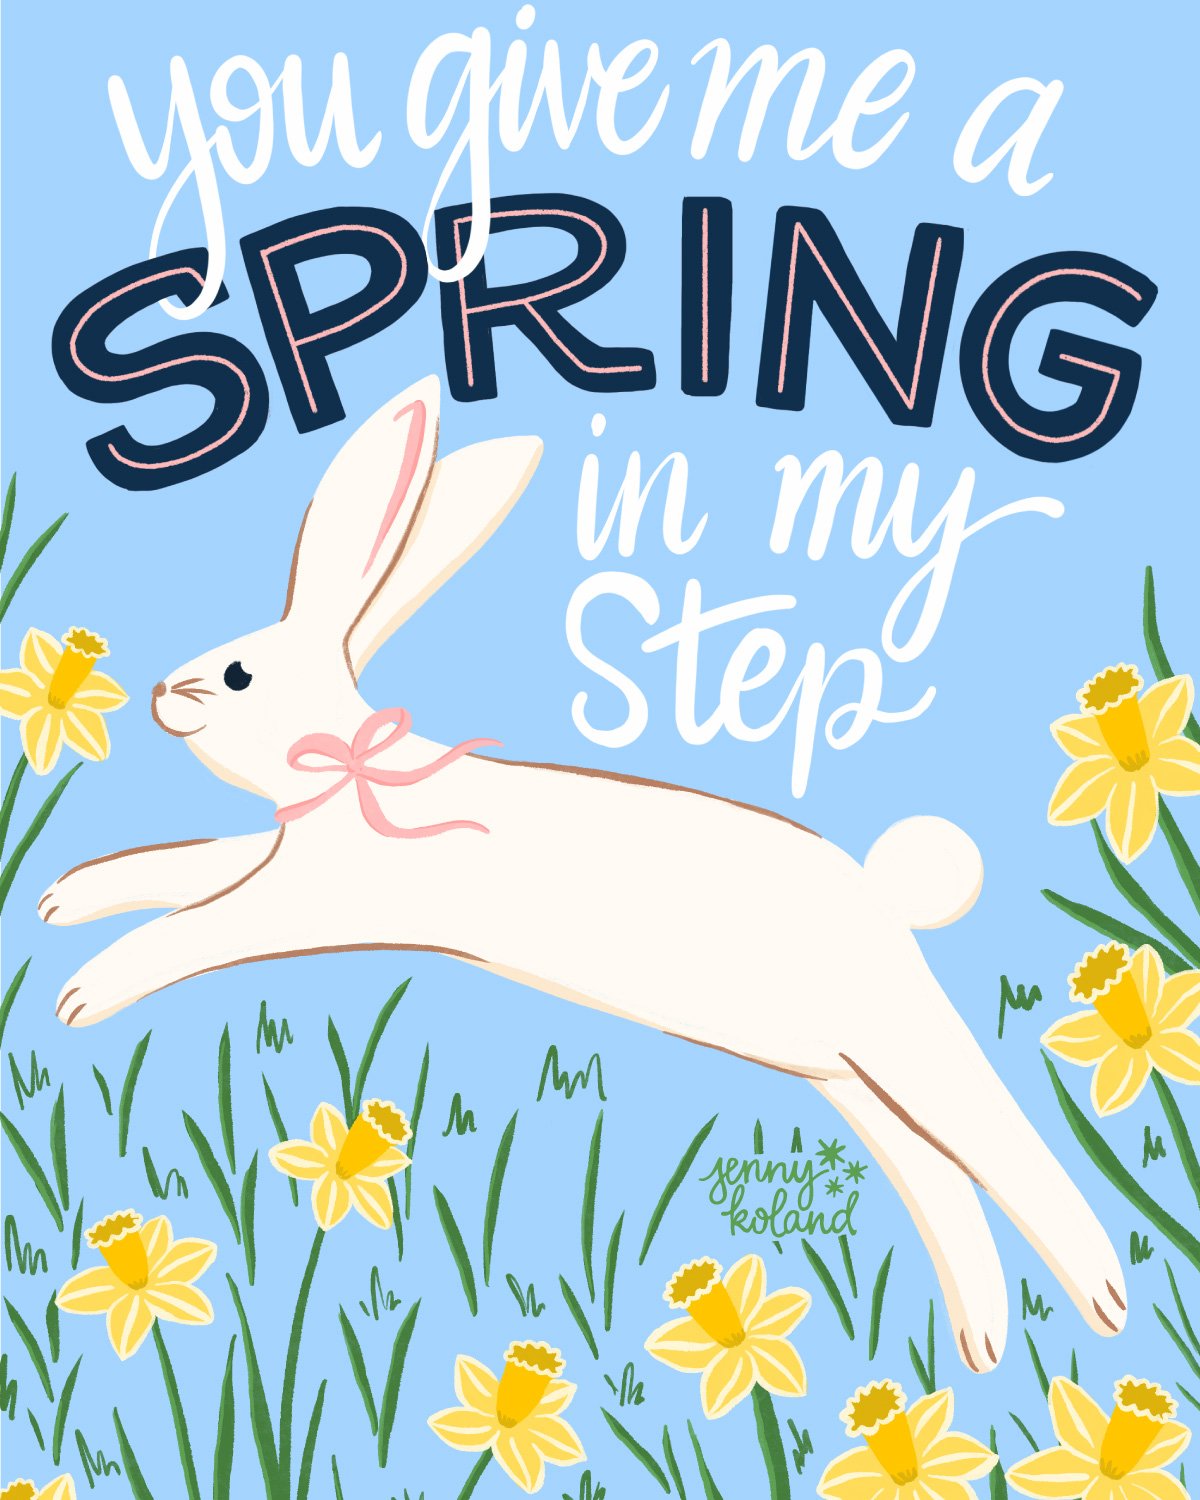 The calendar still says it's spring, even if the weather has been gray and foggy over here. And spring calls for bunnies and daffodils! 

#springart #springillustration #greetingcarddesign #dhgartspark #bunnyillustration #bunnyart #artlicensing #artf